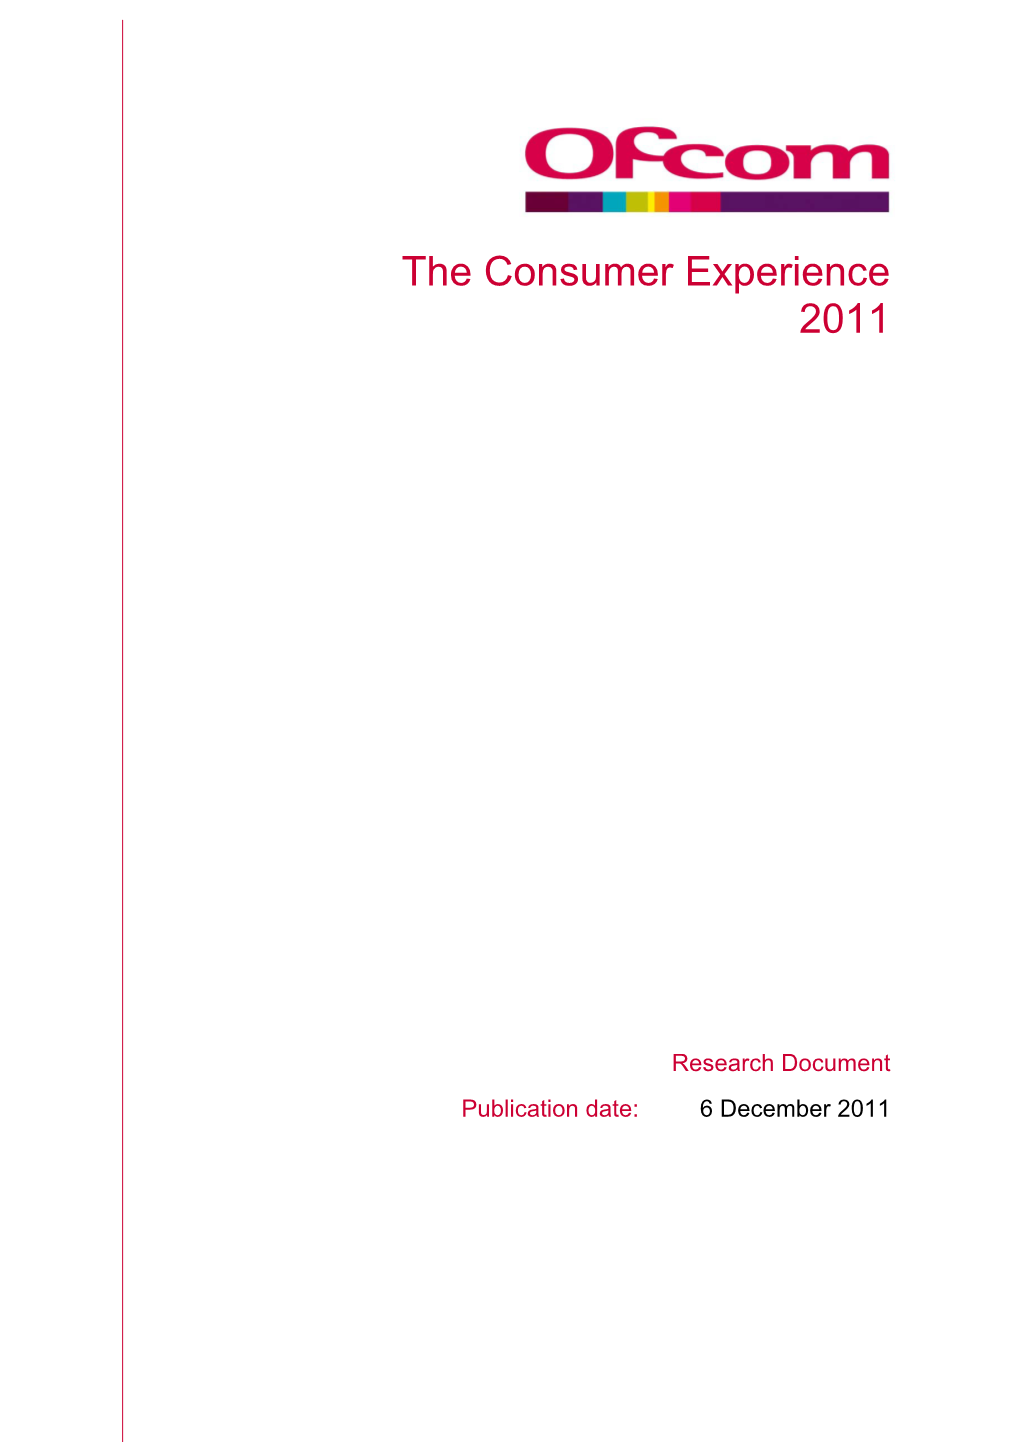 The Consumer Experience 2011